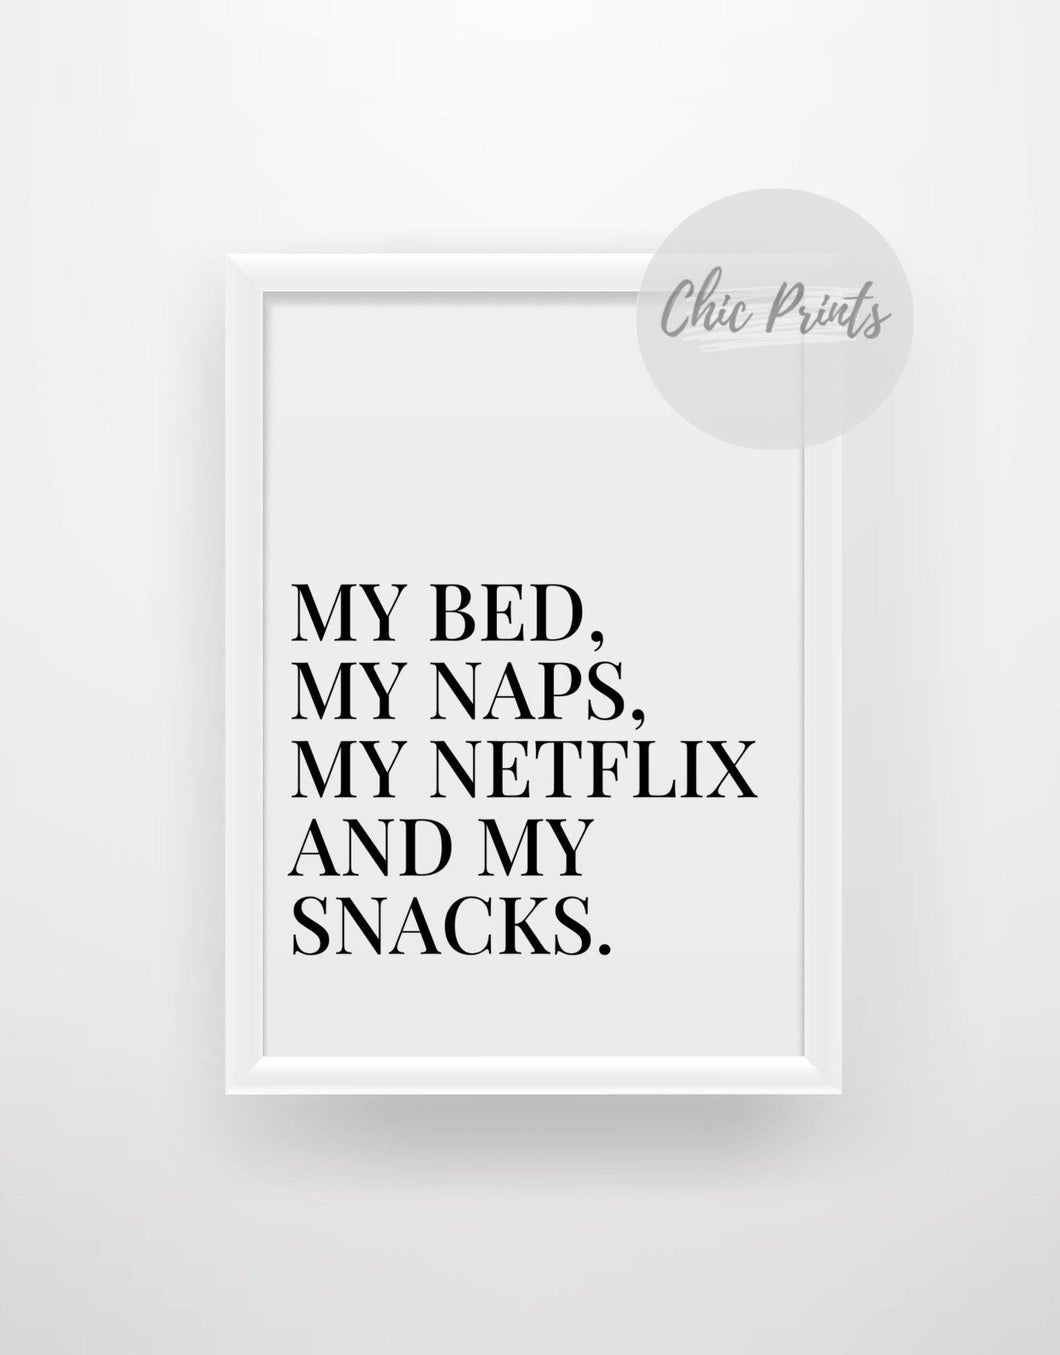 My bed, my naps, my Netflix and my snacks - Chic Prints